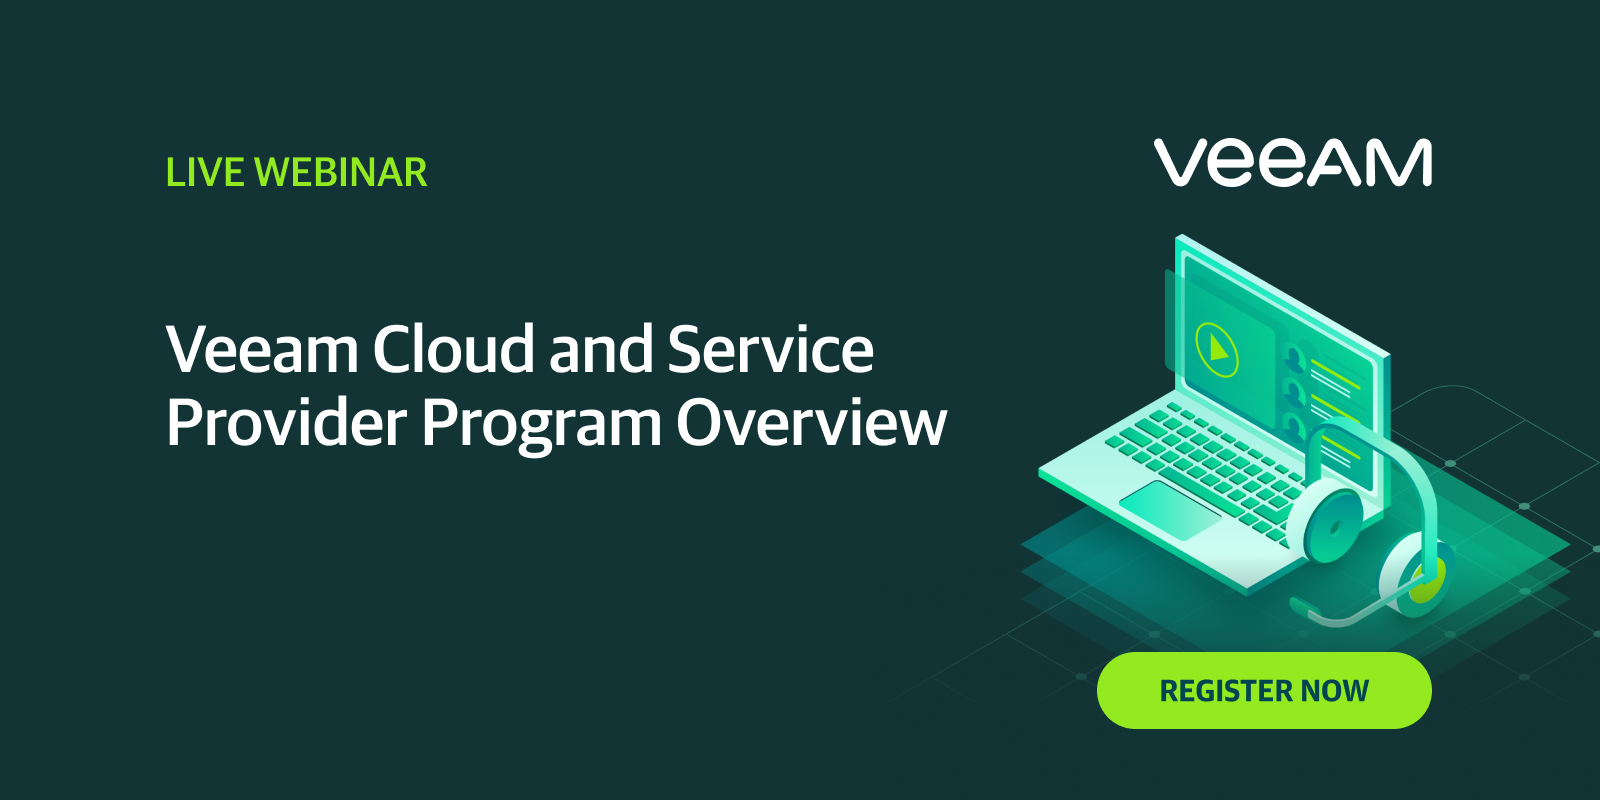 Veeam Cloud and Service Provider Program Overview